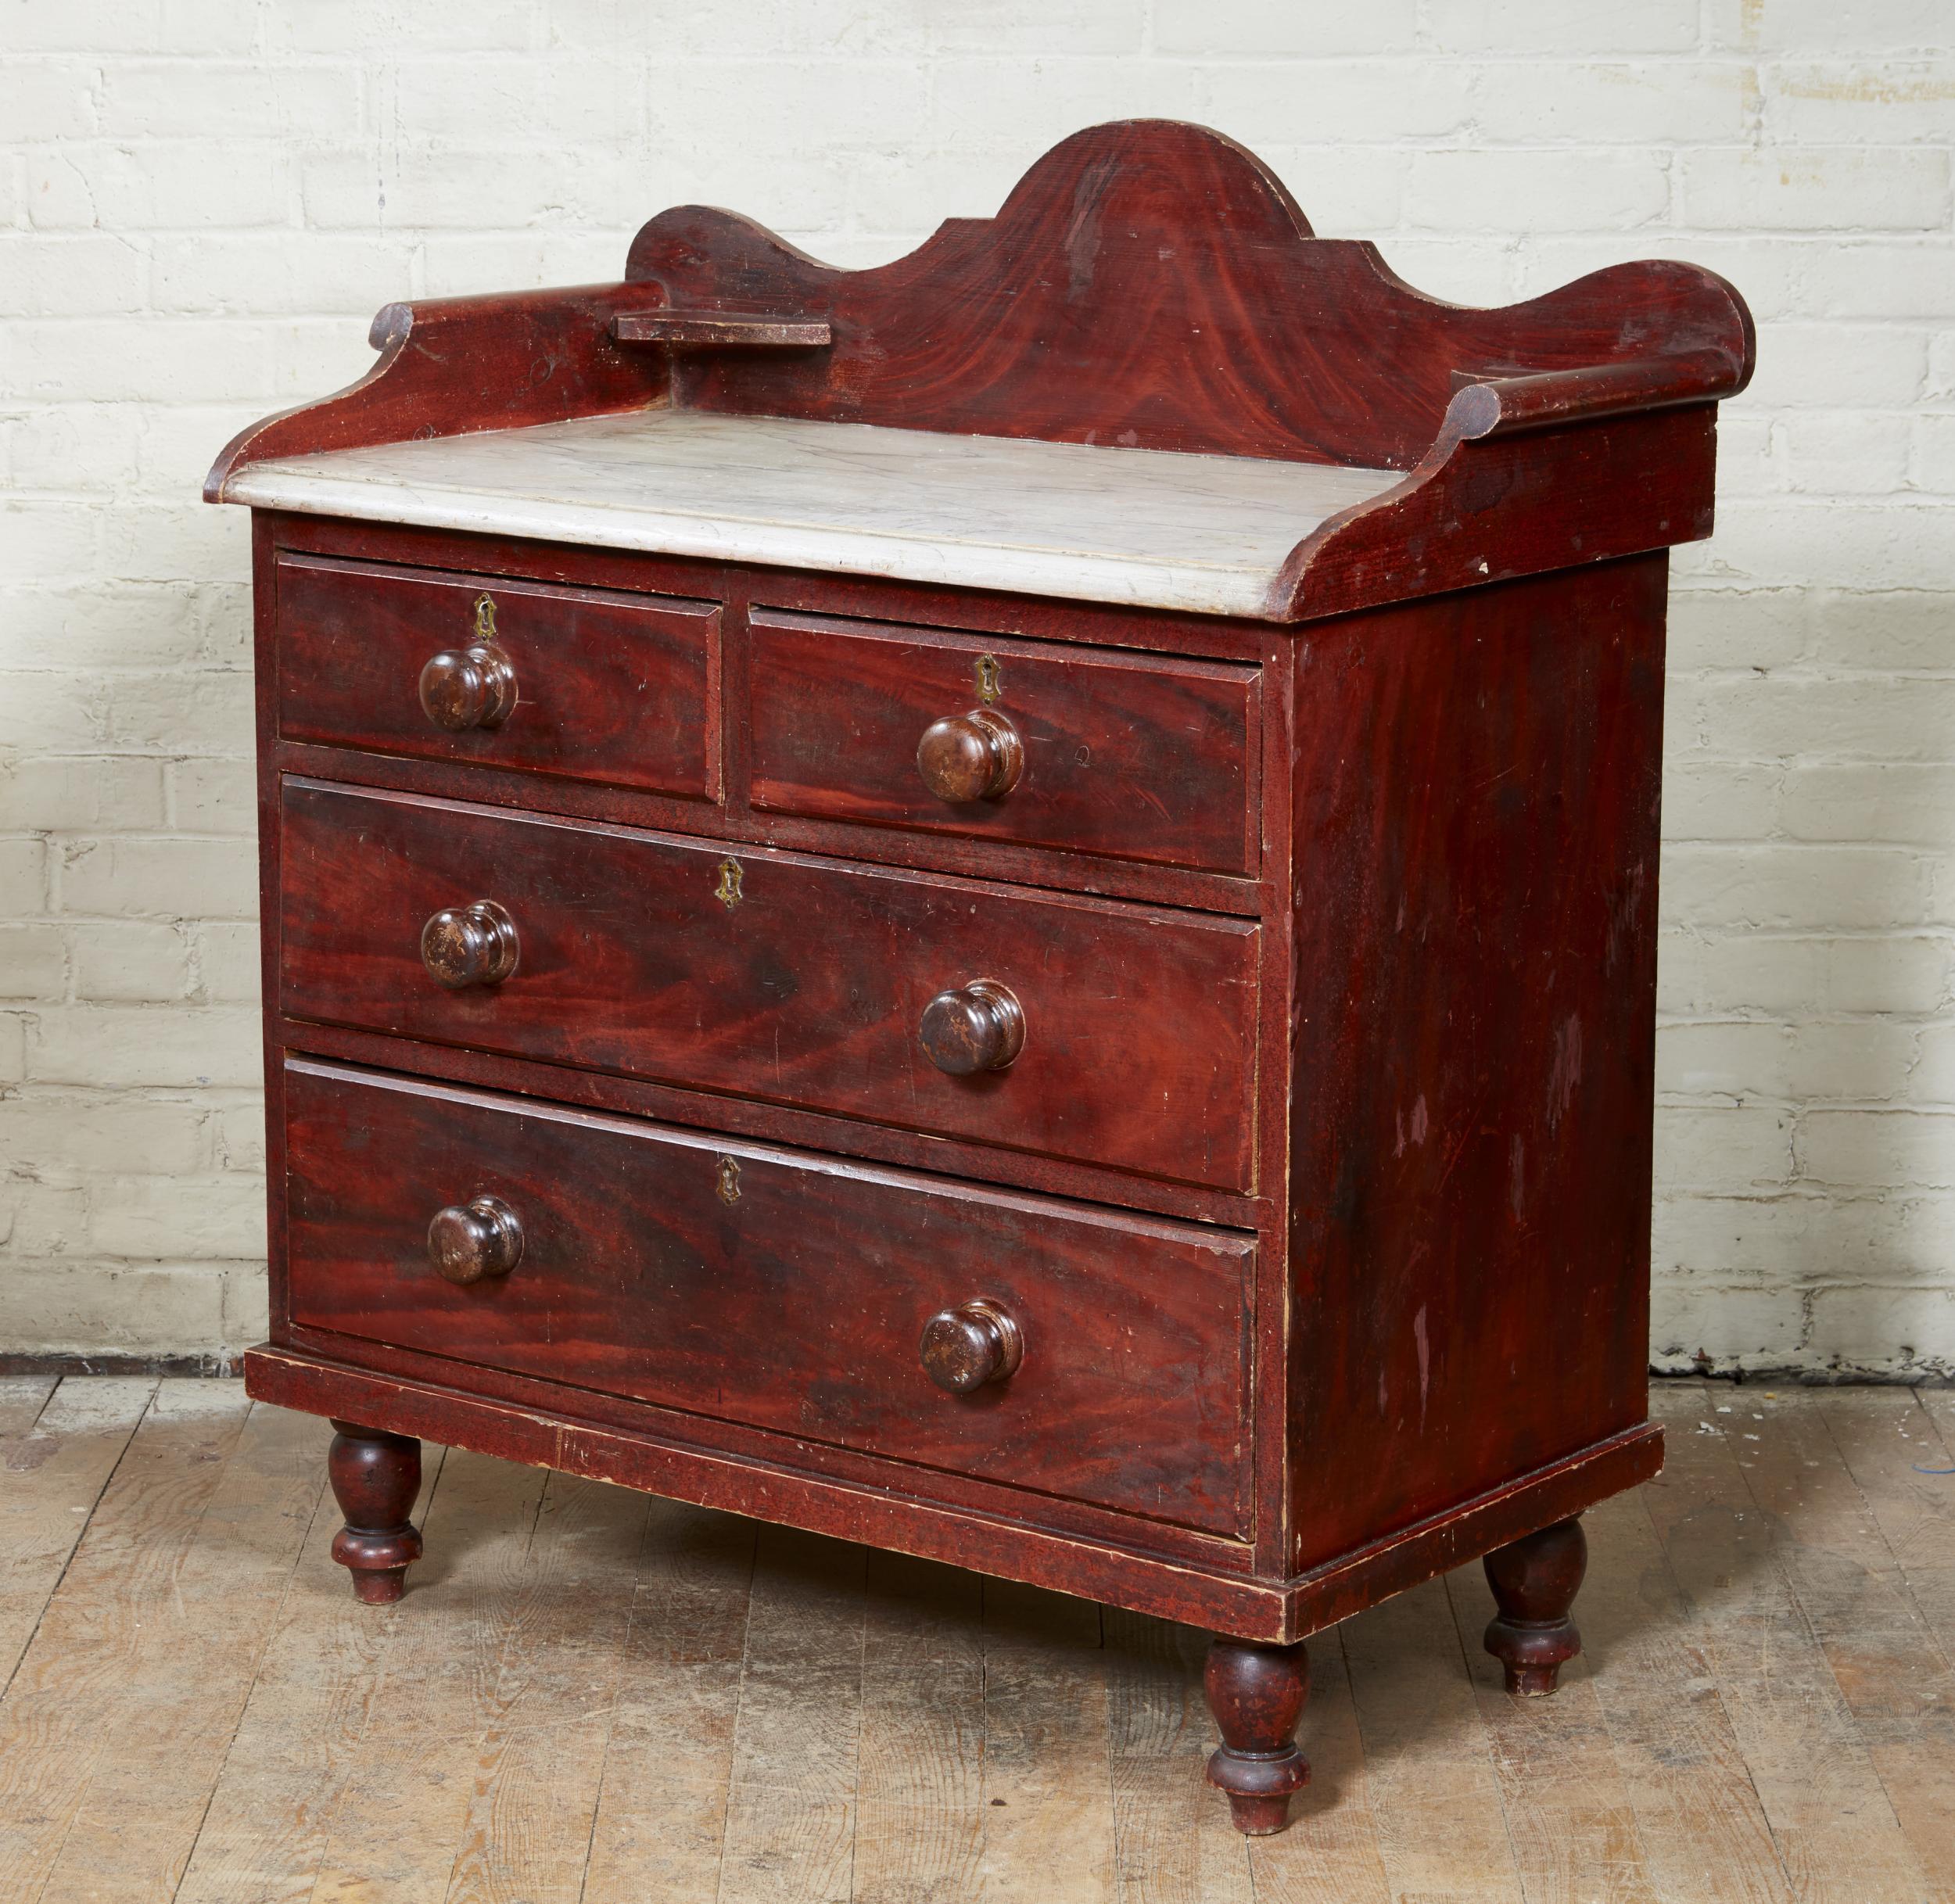 Good mid 19th century English painted chest of drawers having scalloped backspash and scrolled sides over original faux marble painted top over three drawers retaining original turned wooden knobs and standing on turnip turned legs, the whole